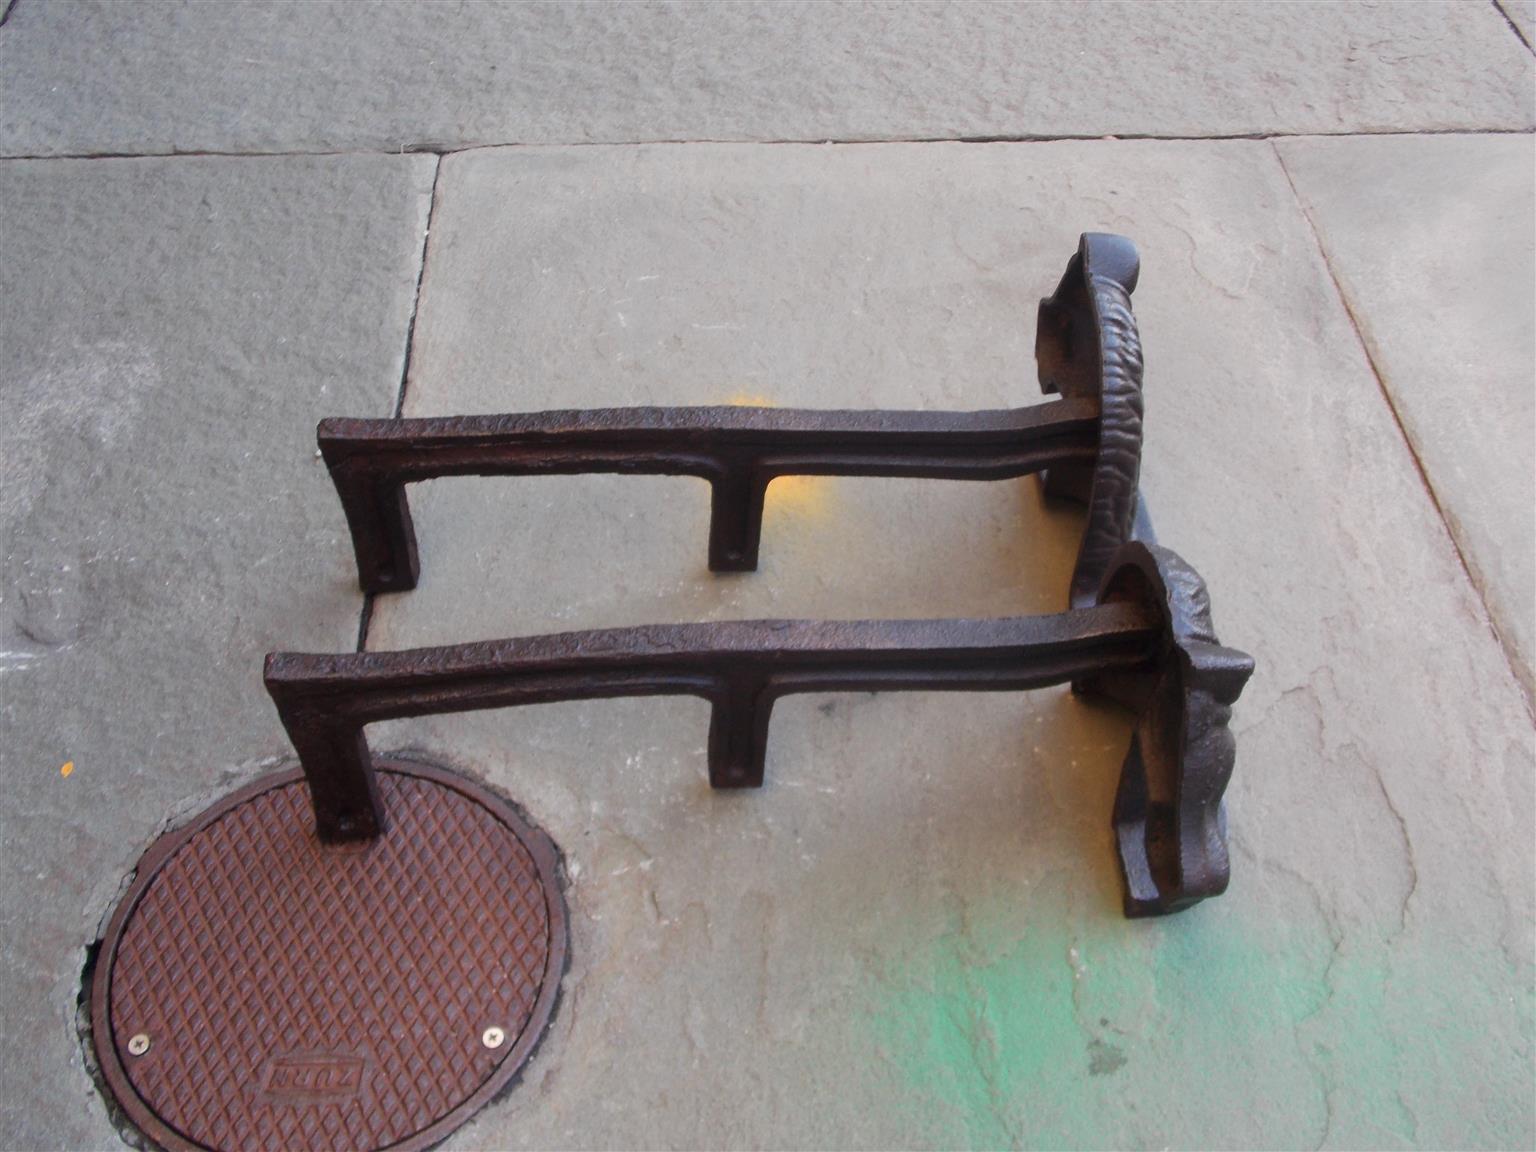 Pair of American Cast Iron Horse Head Andirons with Original Dog Legs, C. 1850 For Sale 1